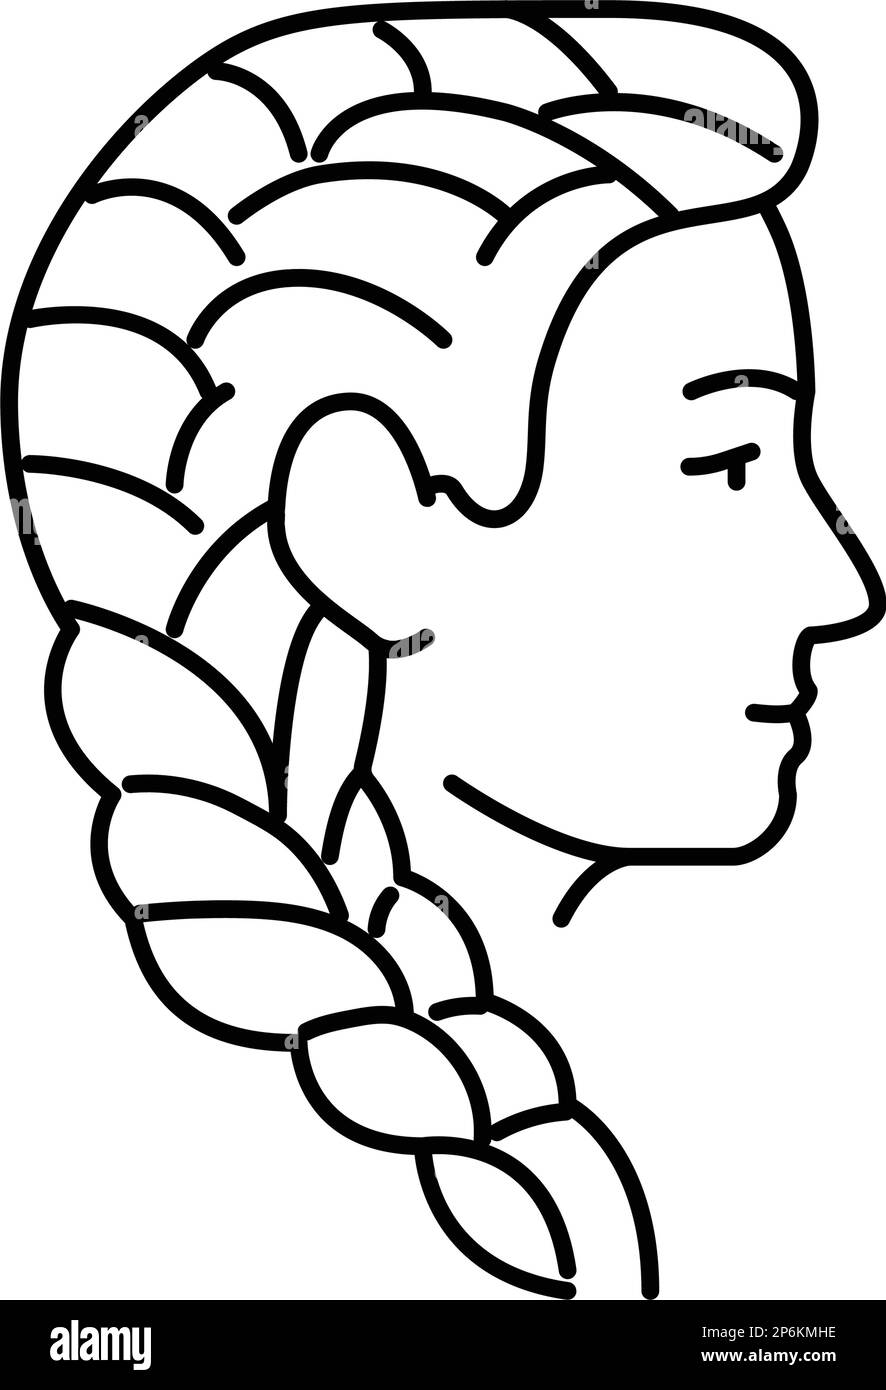 Girl Drawing with braid hairstyle